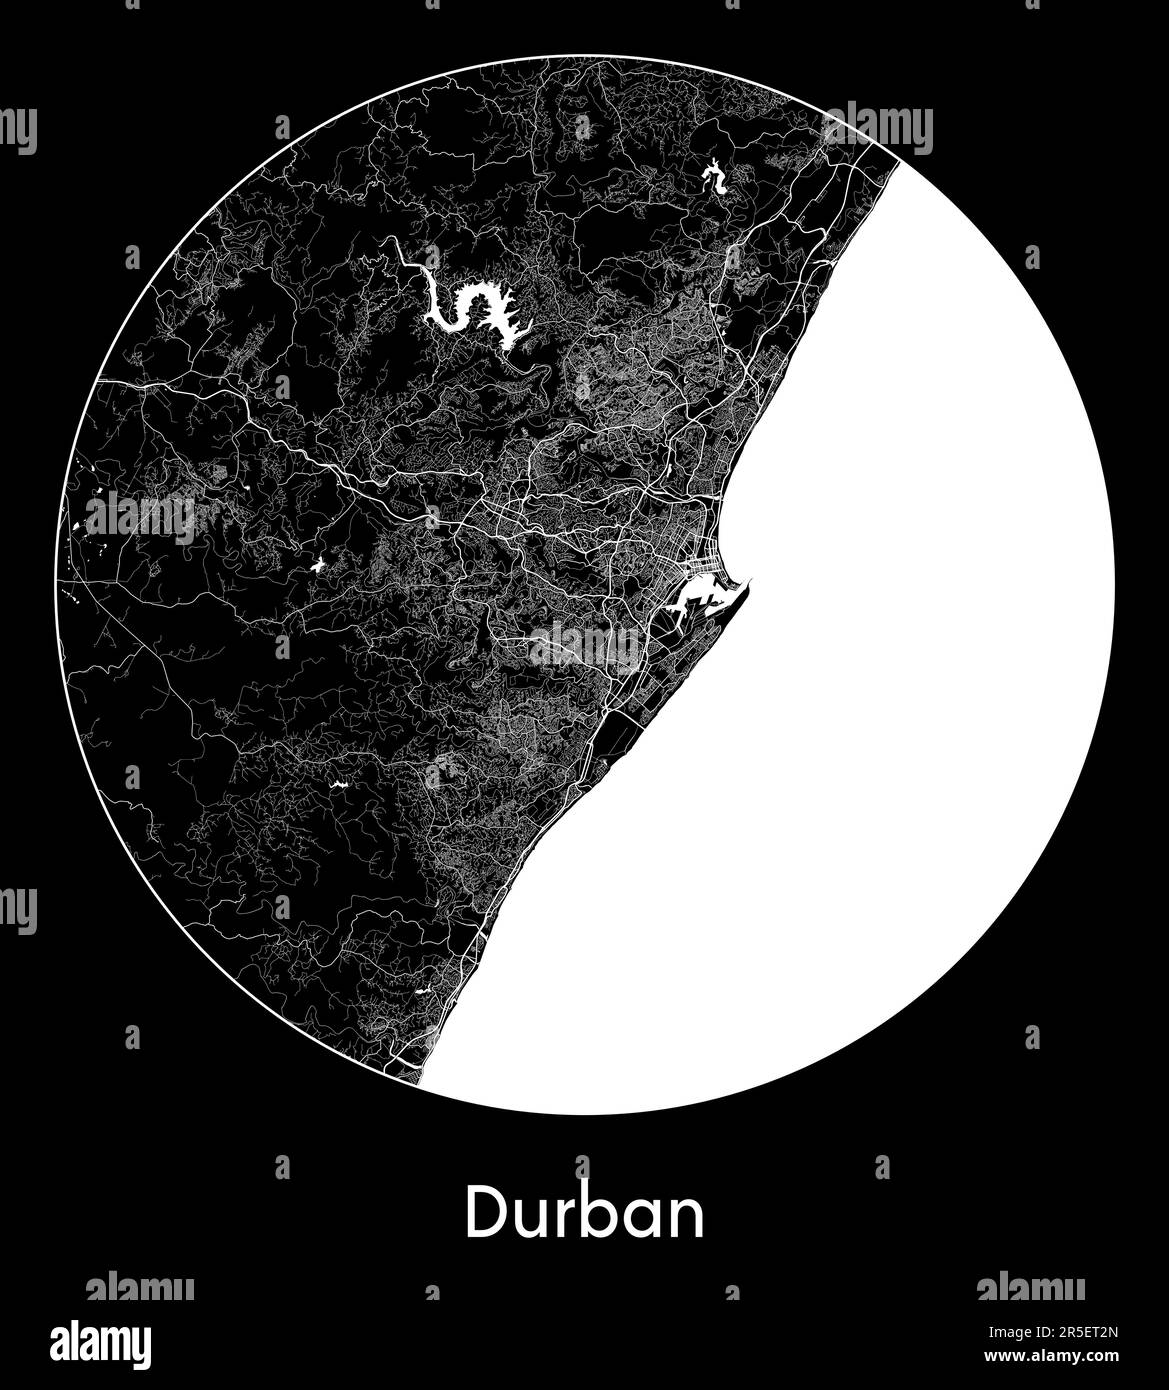 Durban Black and White Stock Photos and Images photo